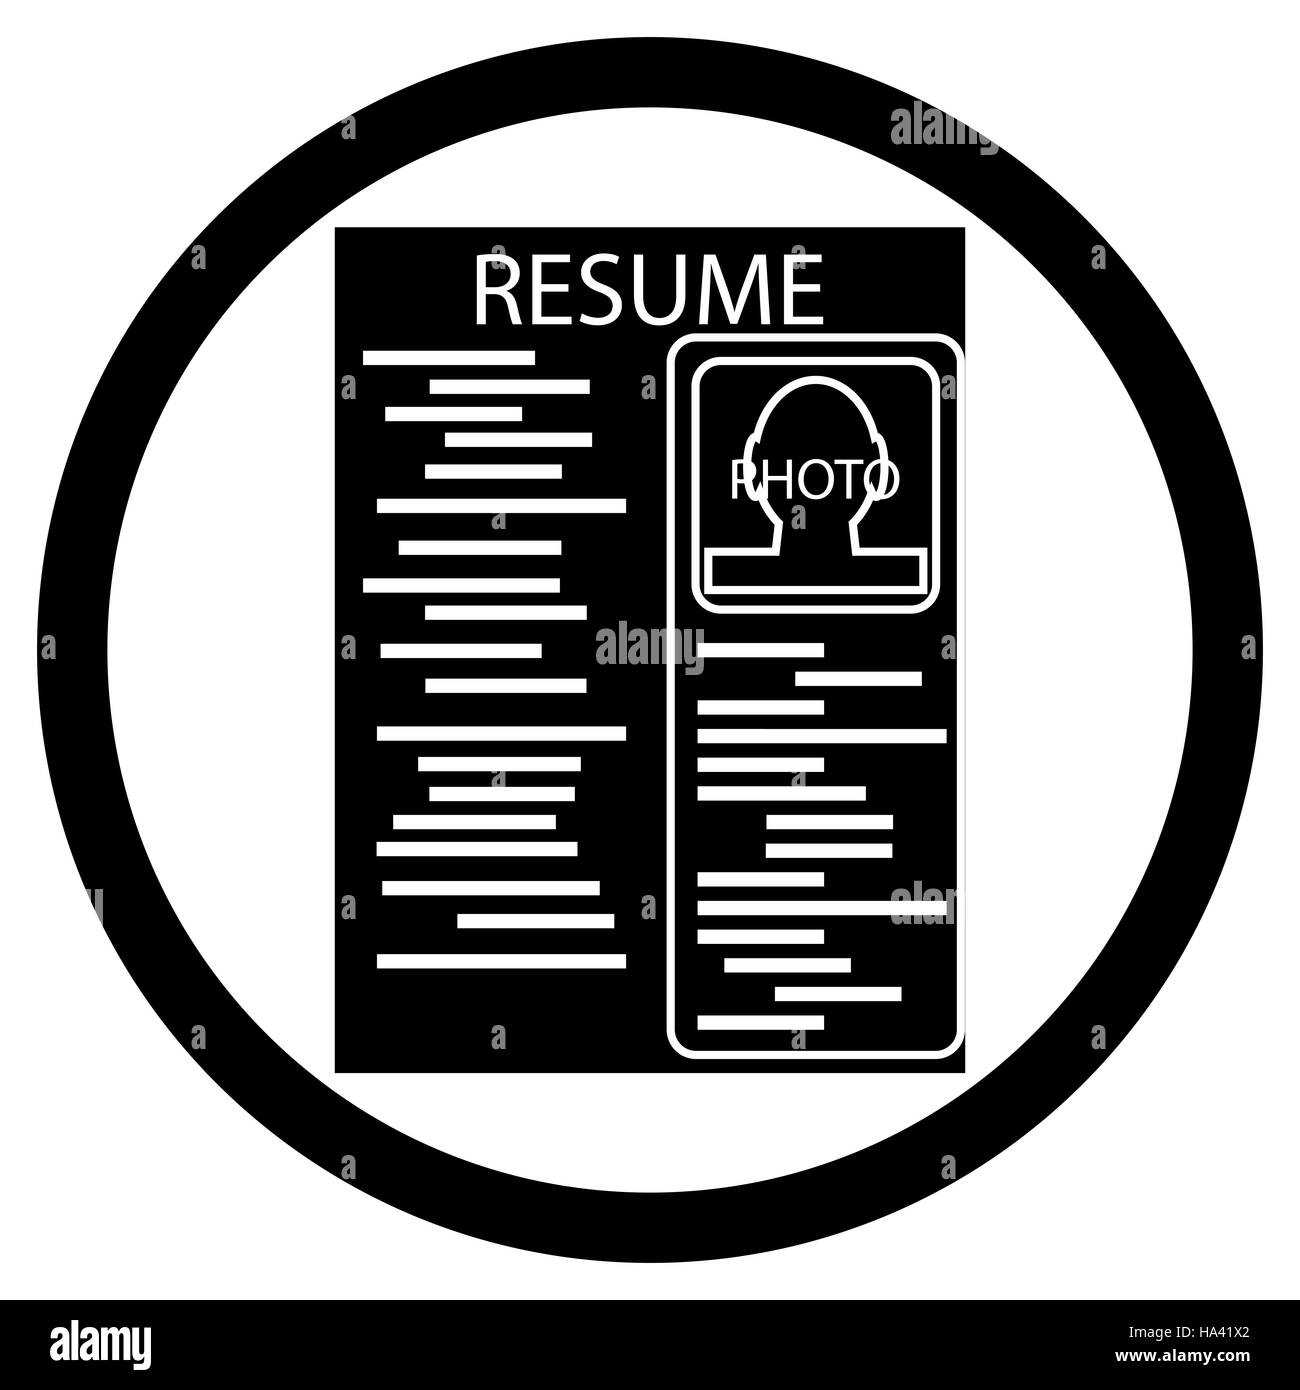 Resume black white icon. Cv icon and paper career icon resume template. Vector illustration Stock Photo